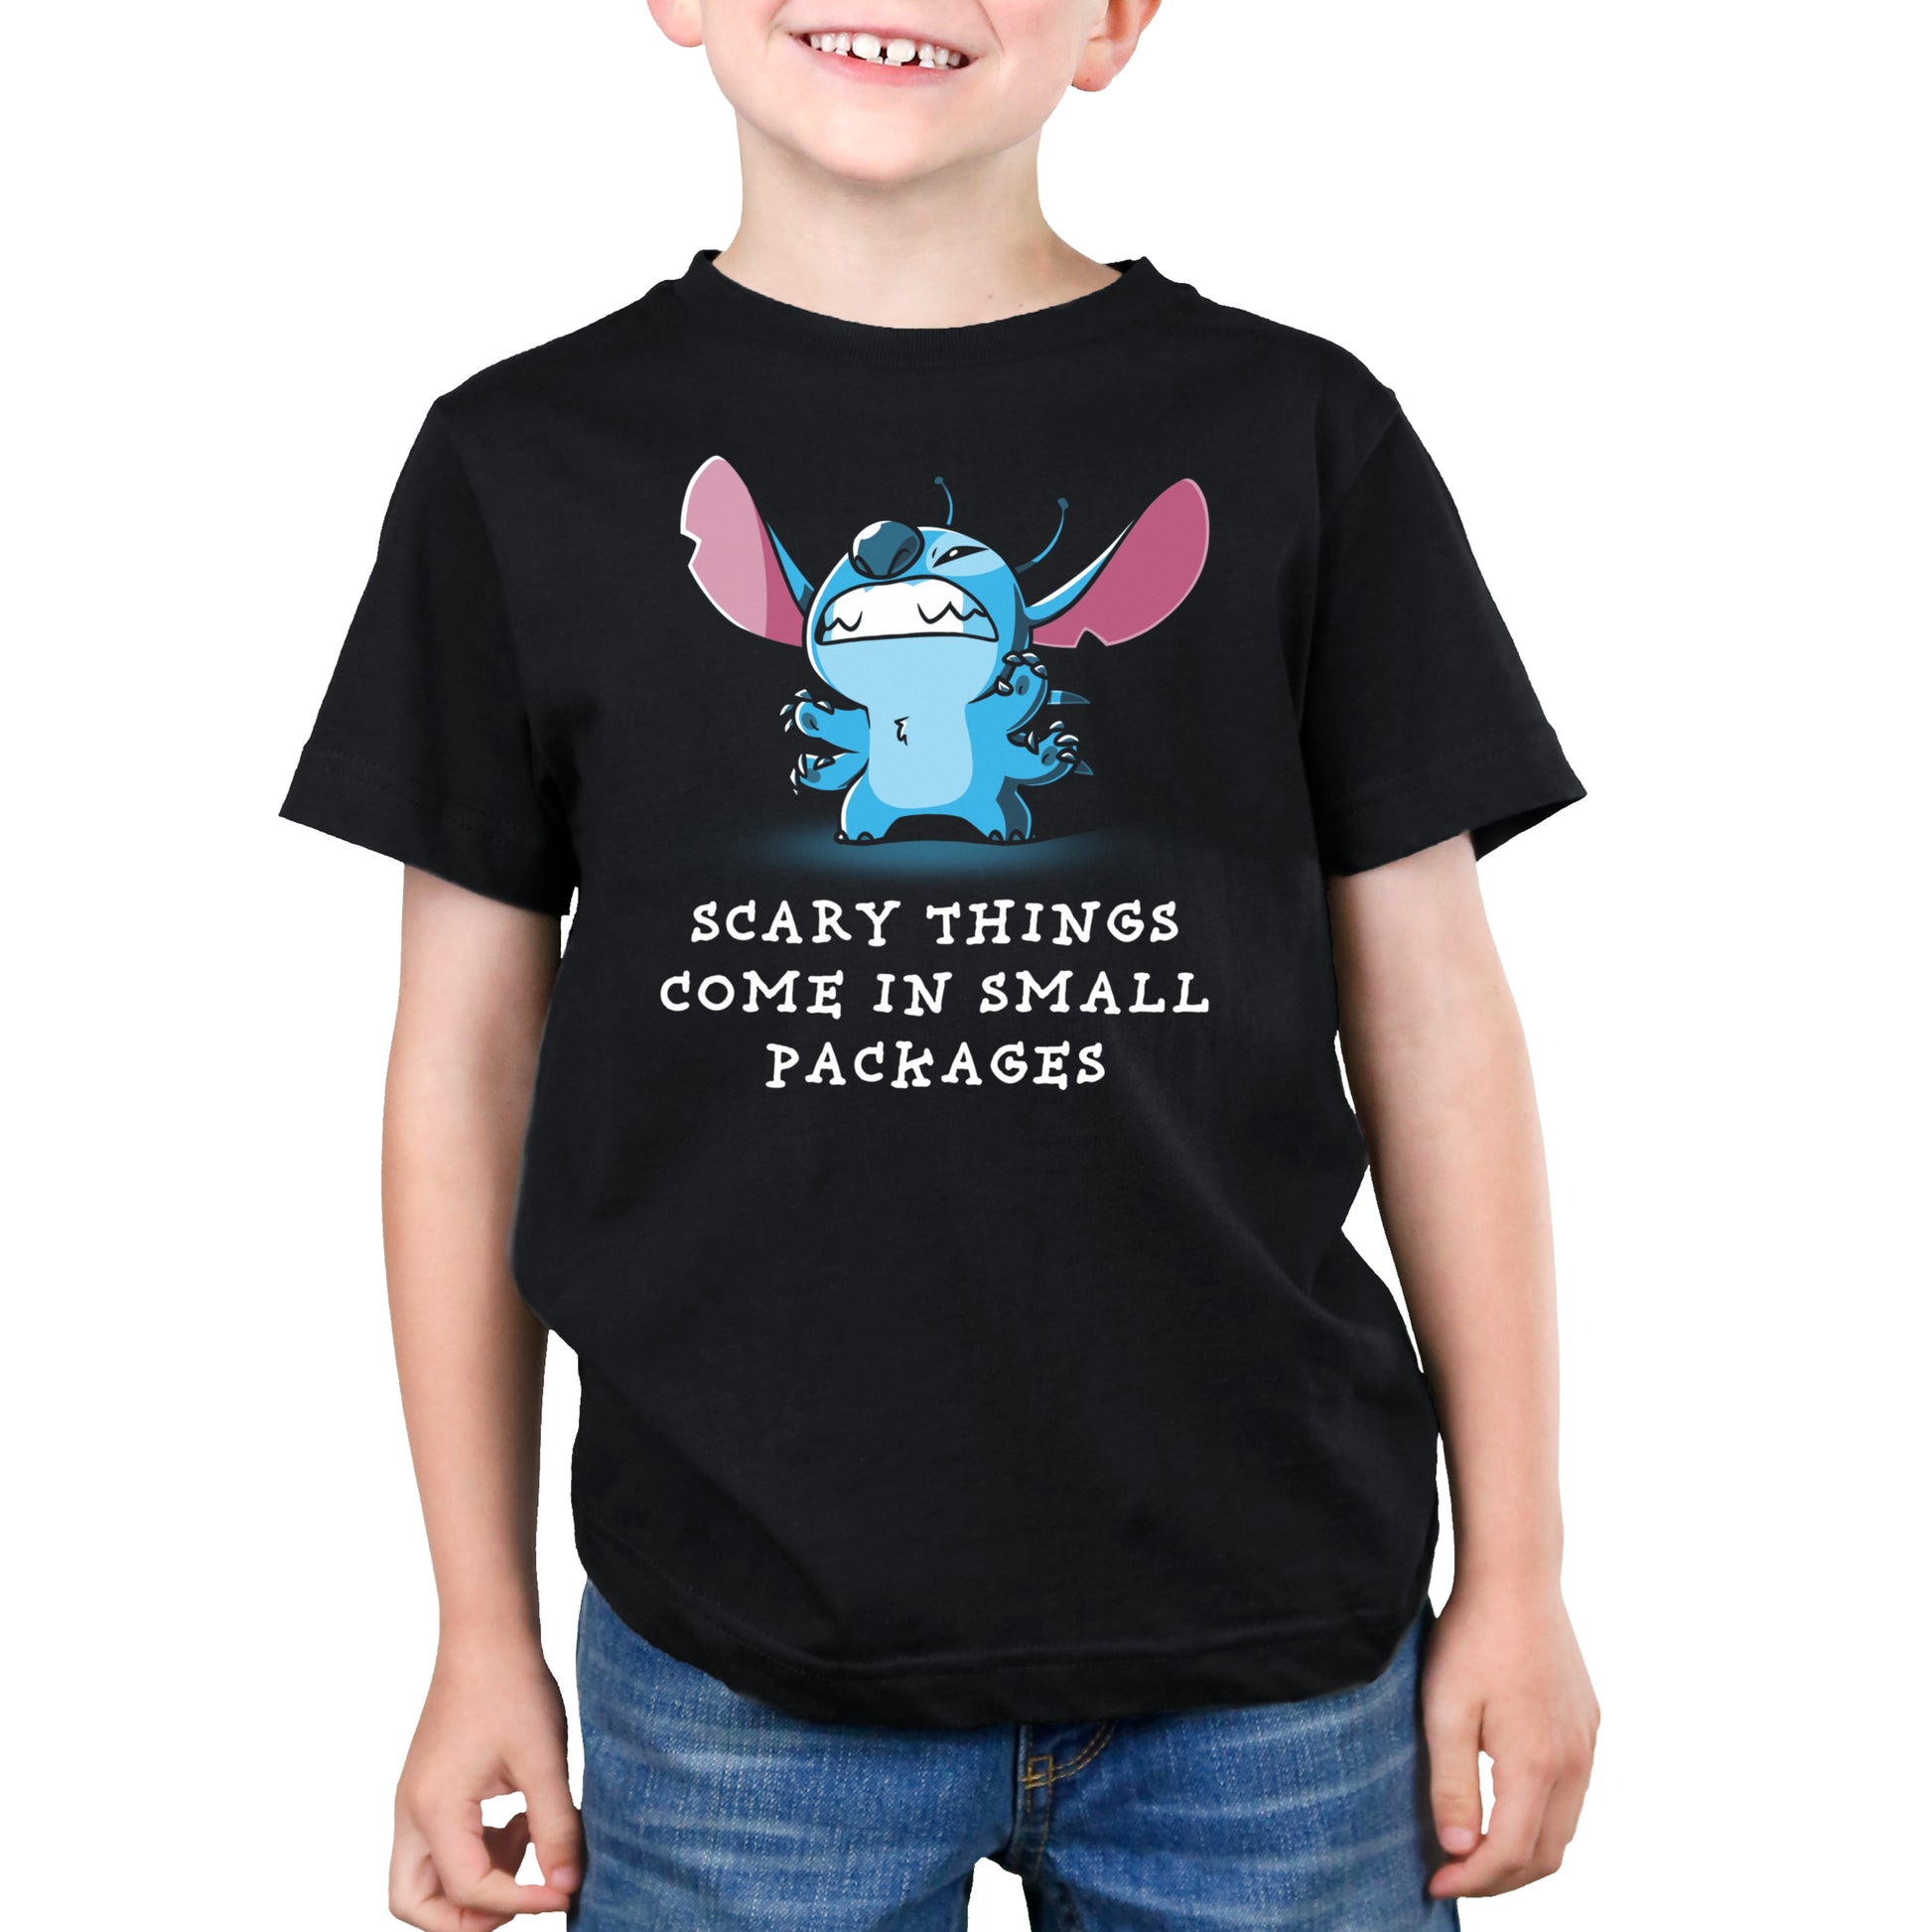 A young boy wearing a Disney t-shirt with the slogan "Scary Things Come in Small Packages.